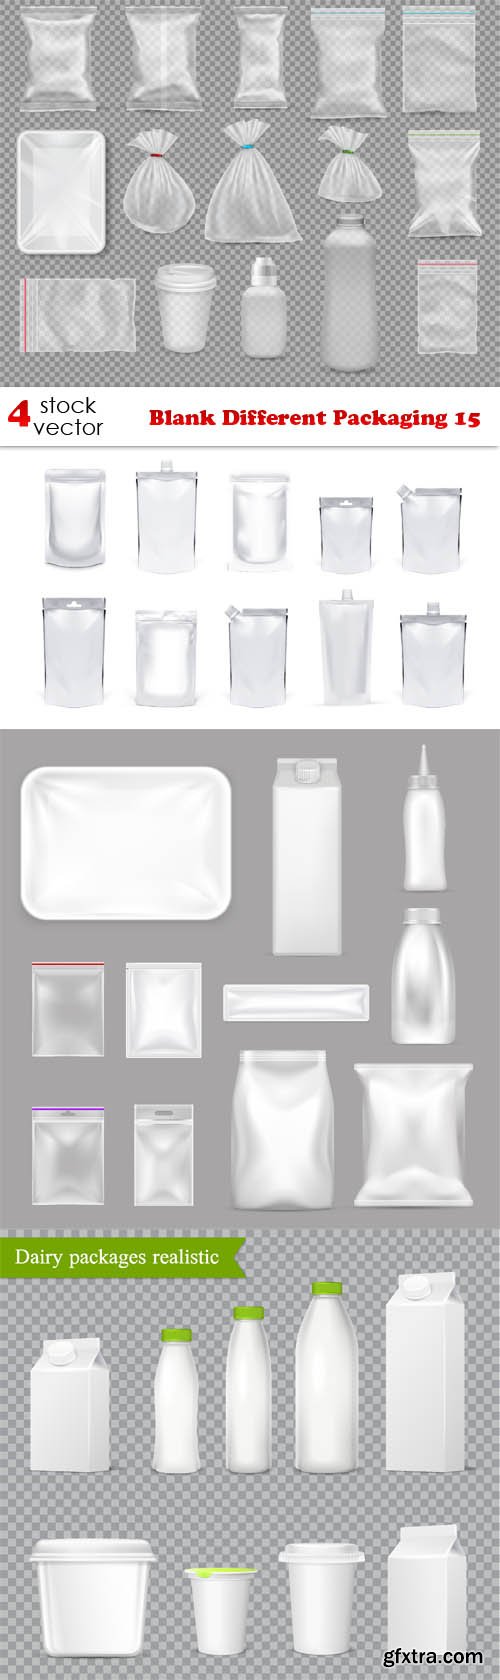 Vectors - Blank Different Packaging 15